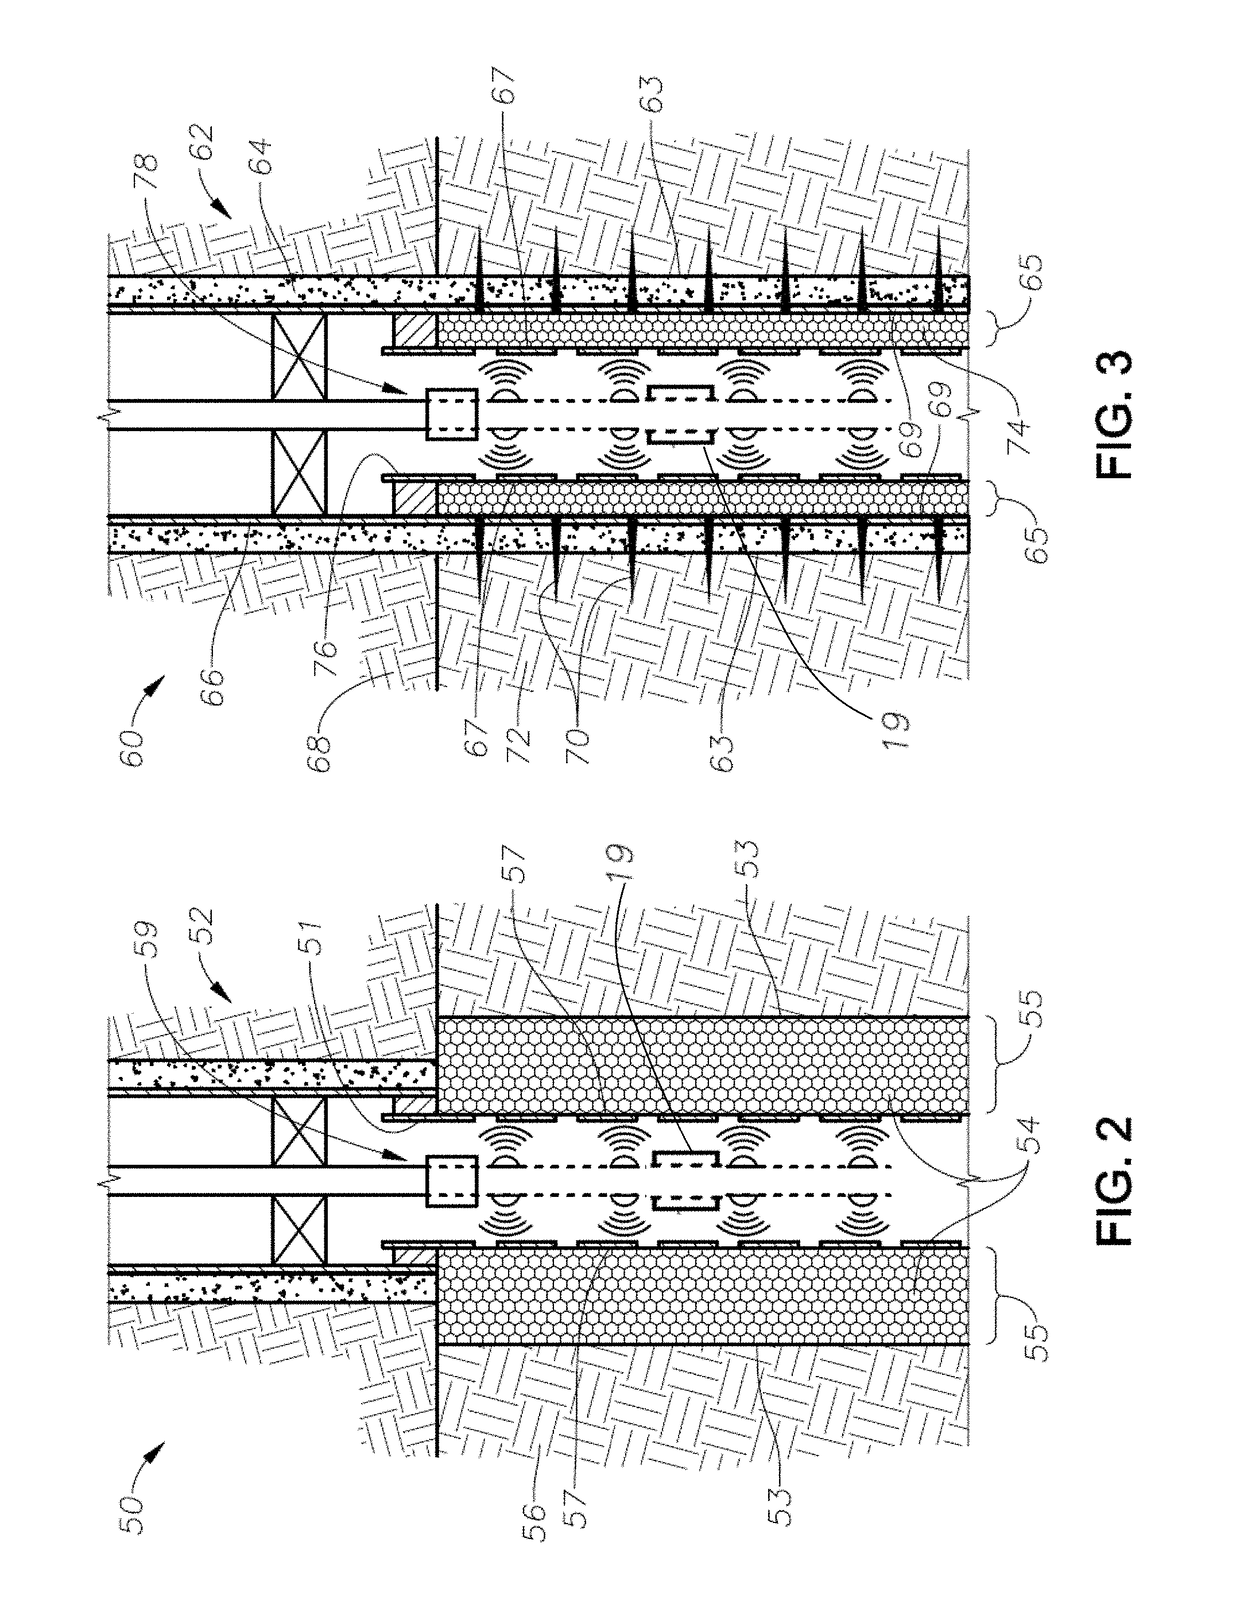 System and method for condensate blockage removal with ceramic material and microwaves